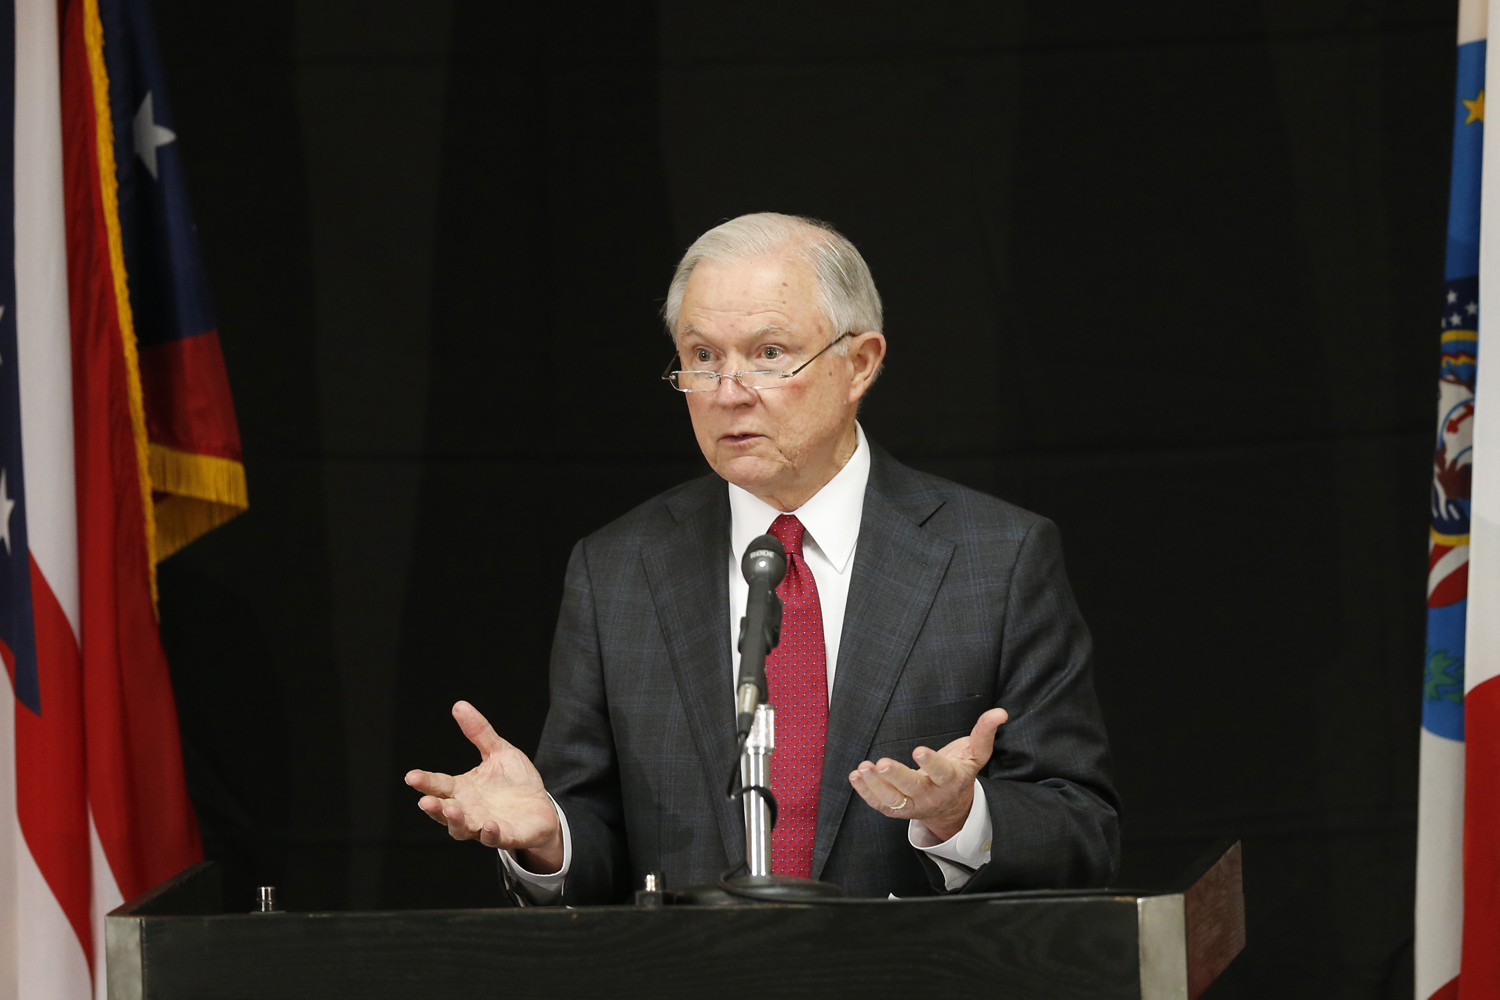 Attorney General Jeff Sessions speaks at the Columbus Police Academy Wednesday, Aug. 2, 2017, in Columbus, Ohio. Jay LaPrete/AP)